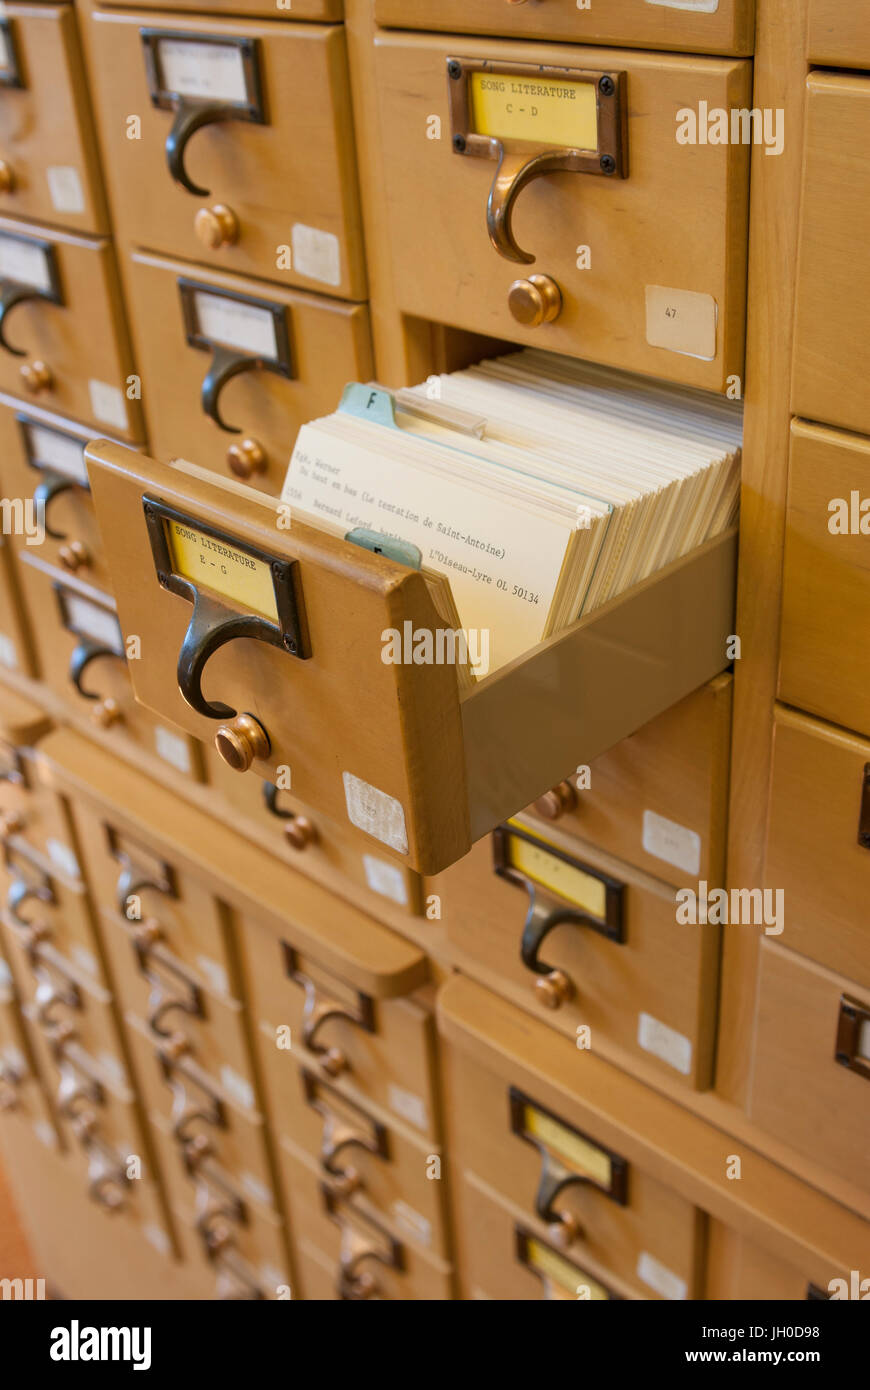 A Wooden Drawer Card Catalog In A Library Using The Dewey Decimal